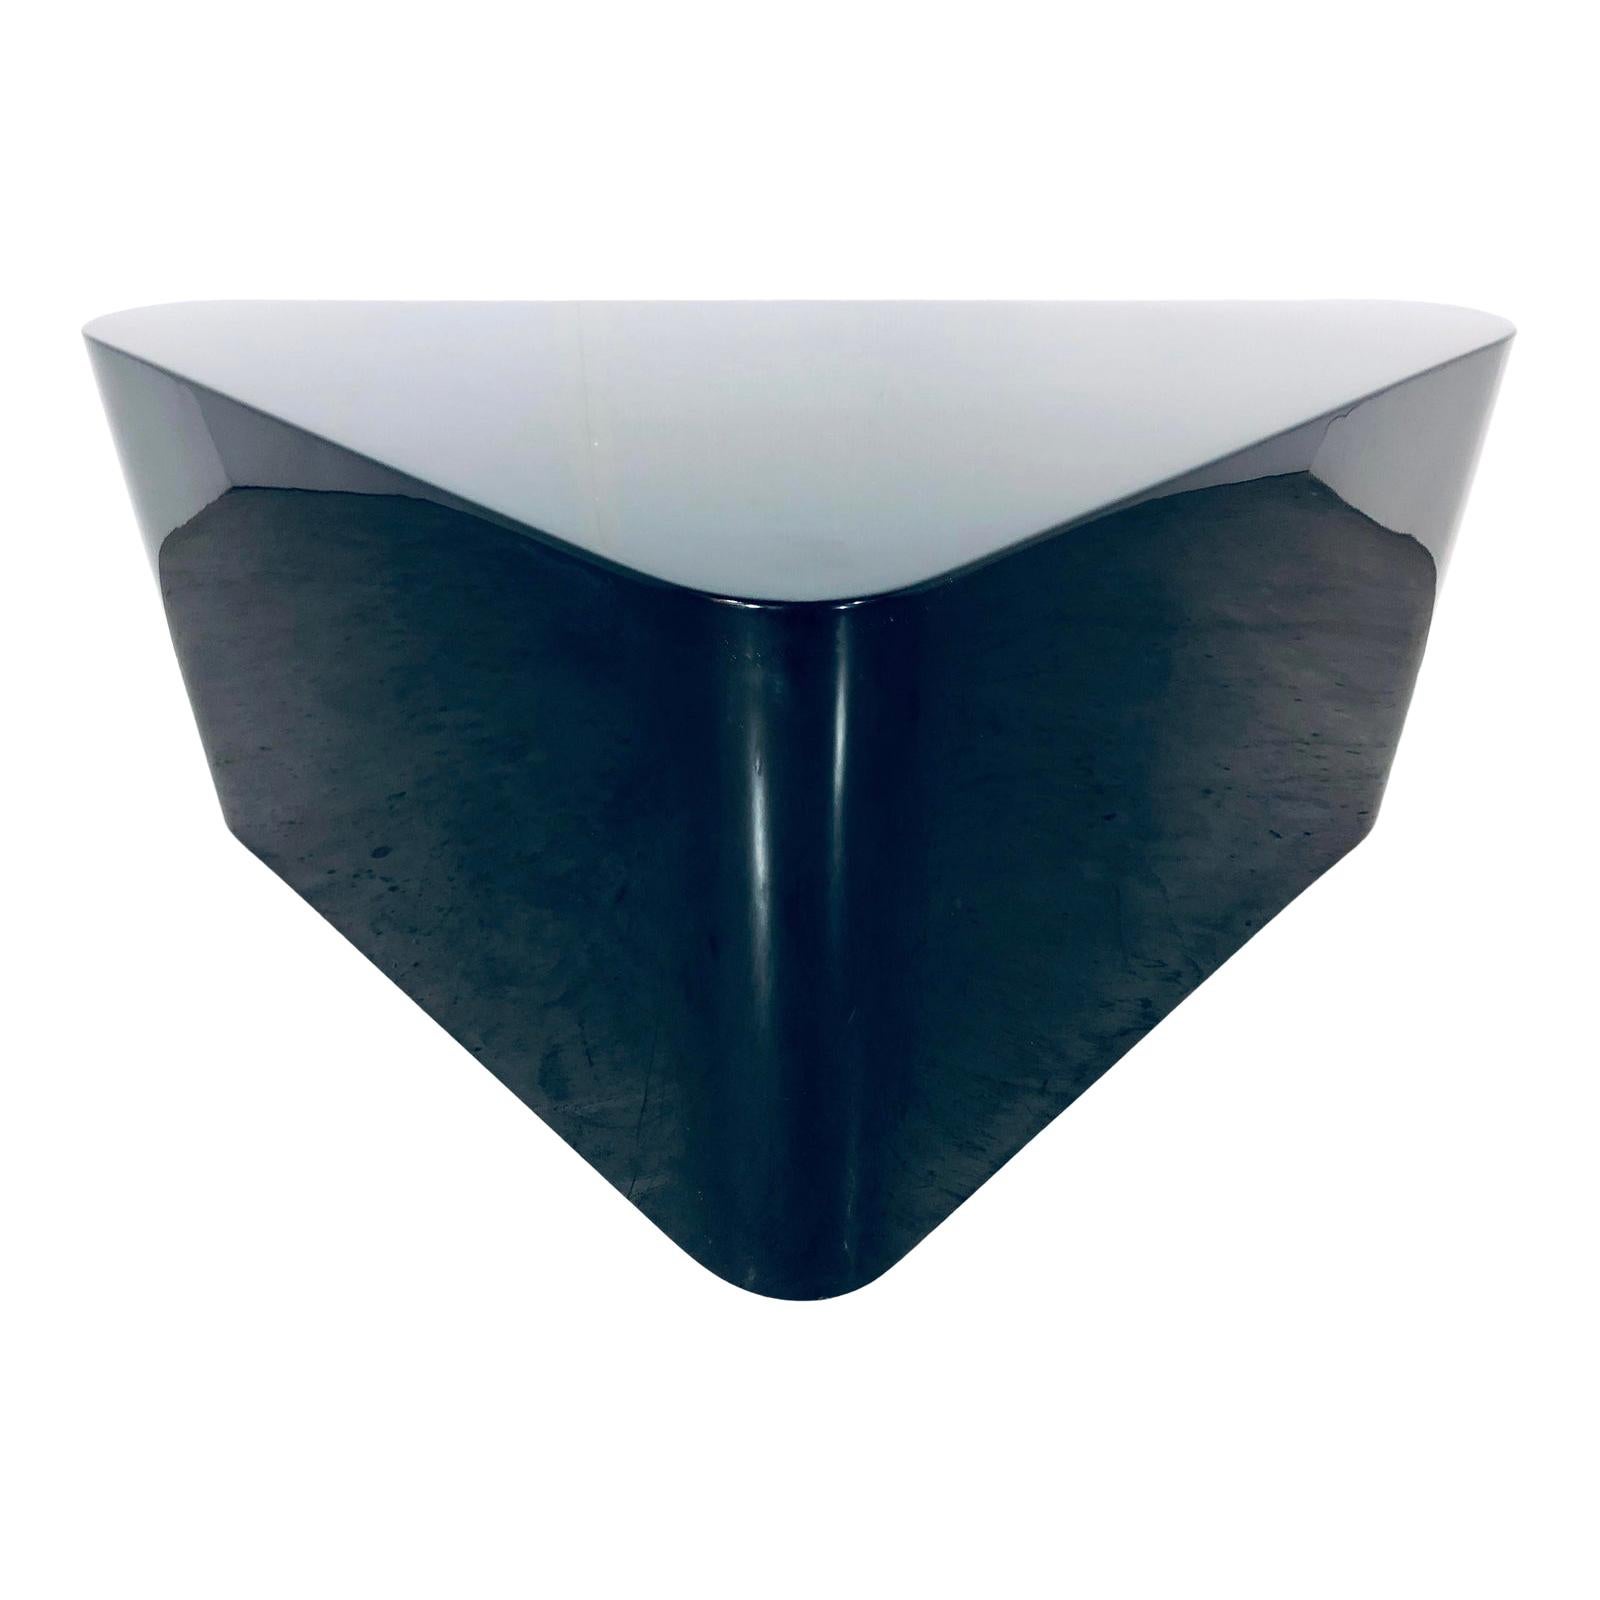 Paul Mayen for Intrex Black Lacquer Coffee Table